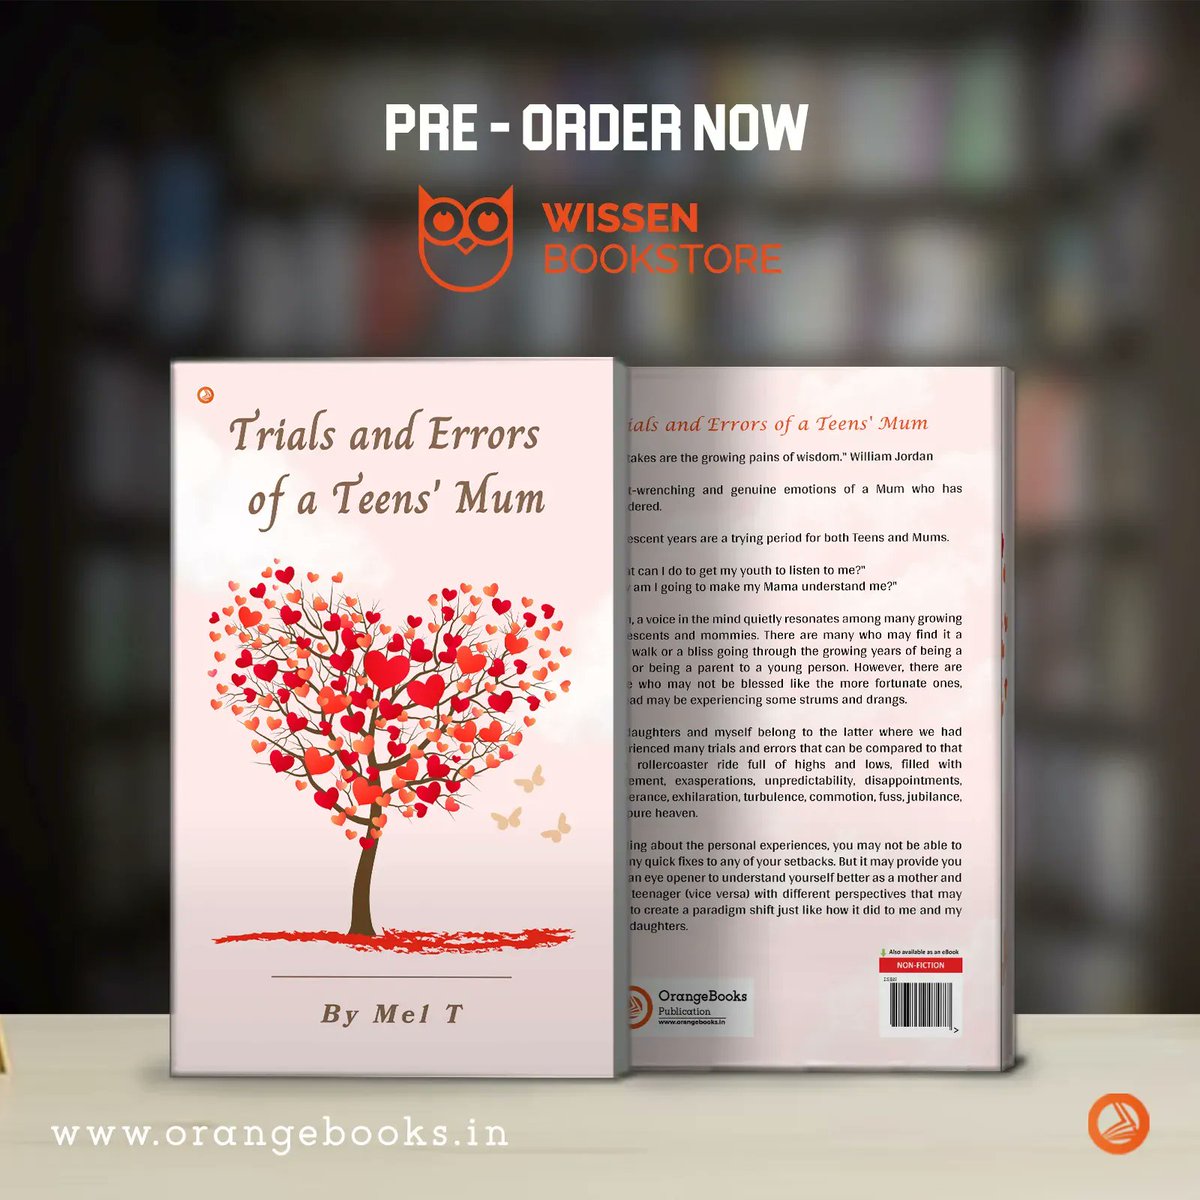 Mel T 's book 'Trials and Errors of a Teens’ Mum ' is now available in paperback format. Pre Order your copy now!
Self Book Store: buff.ly/3LplKmU 
.

#orangebooks #fiction #authorofinstagram #instalike #instadaily #preorder